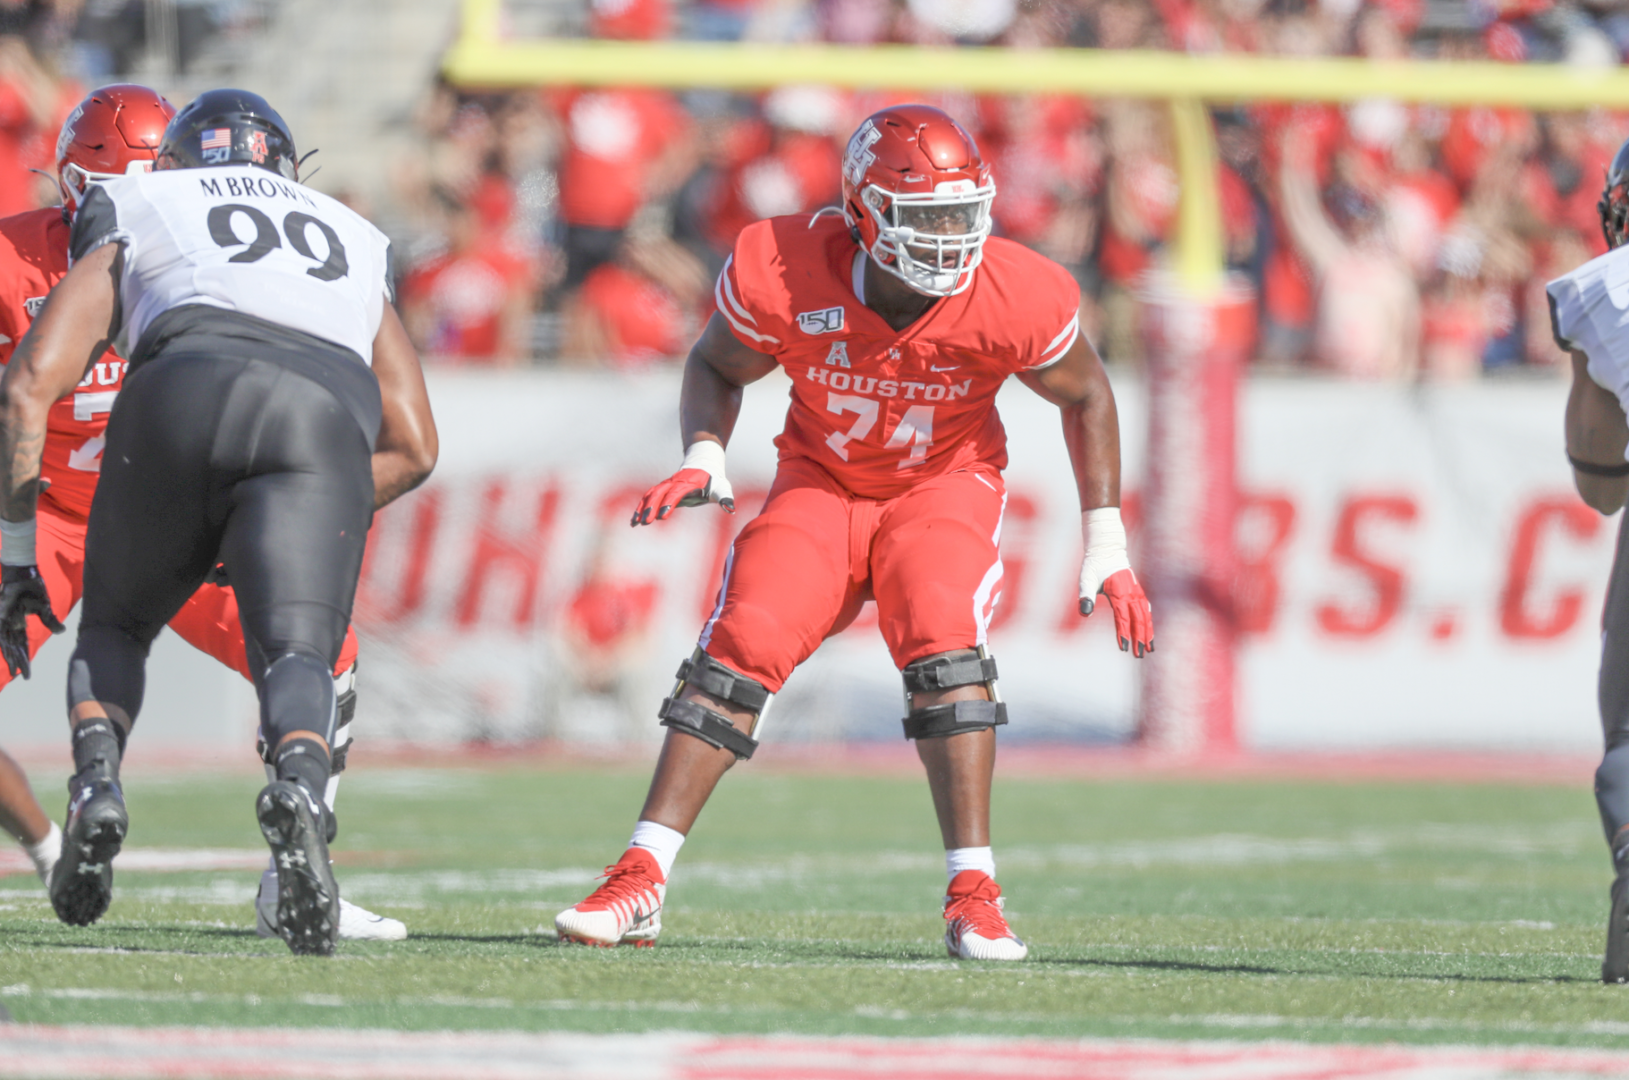 Senior offensive tackle Josh Jones is expected to be picked in the first round of the 2020 NFL Draft by many analysts. | Stephen Pinchback/Houston Athletics